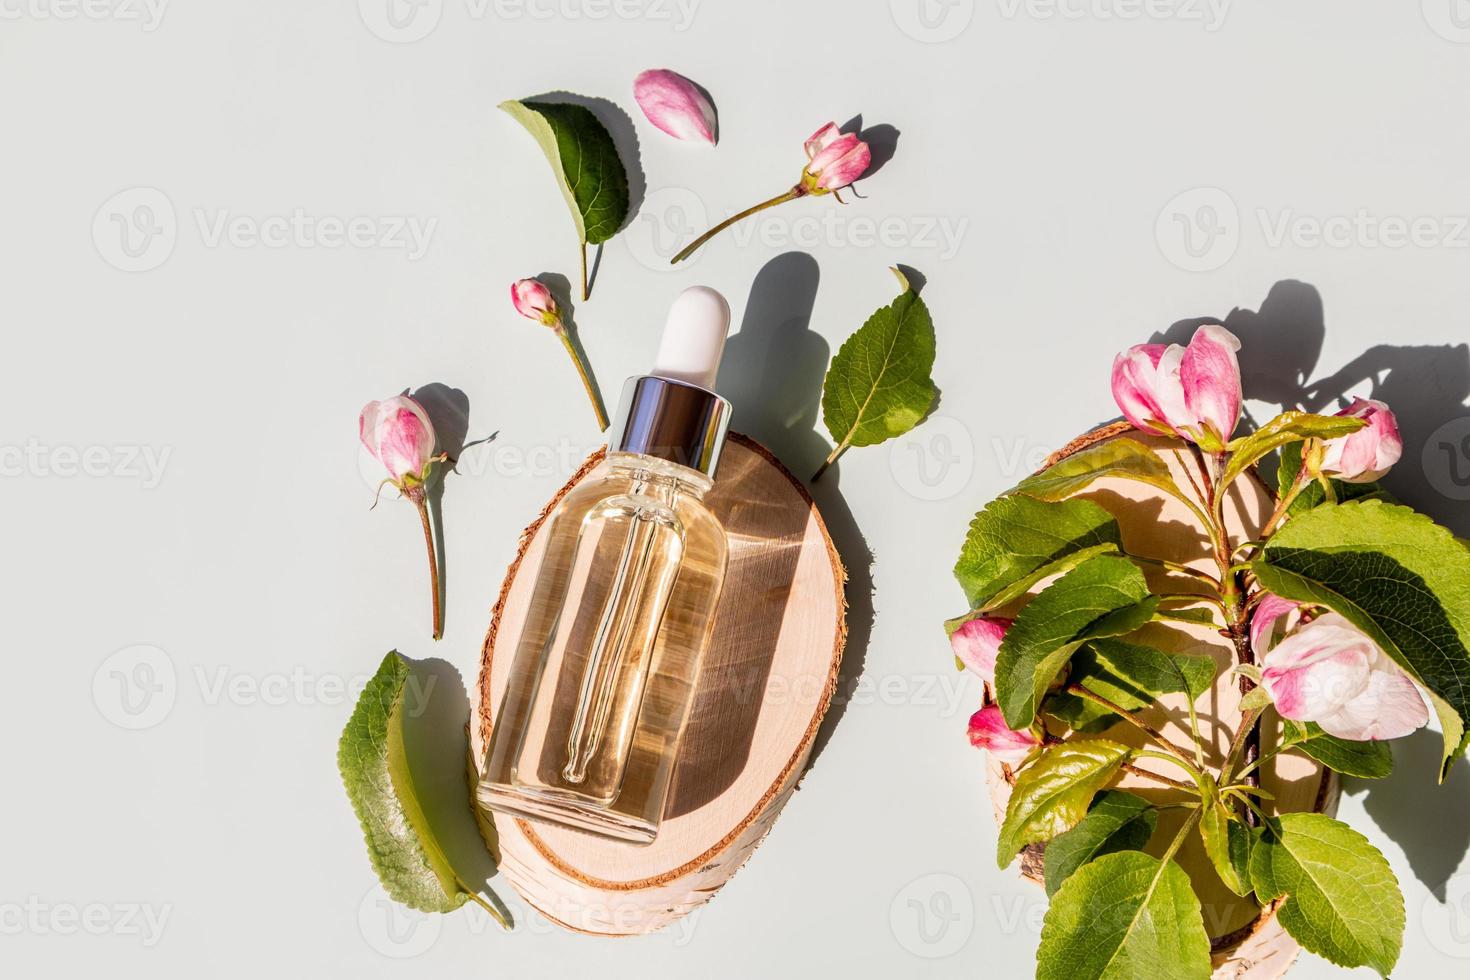 a transparent cosmetic bottle with a natural face and body care product lies on a wooden tree slice among the spring flowers of an apple tree. photo